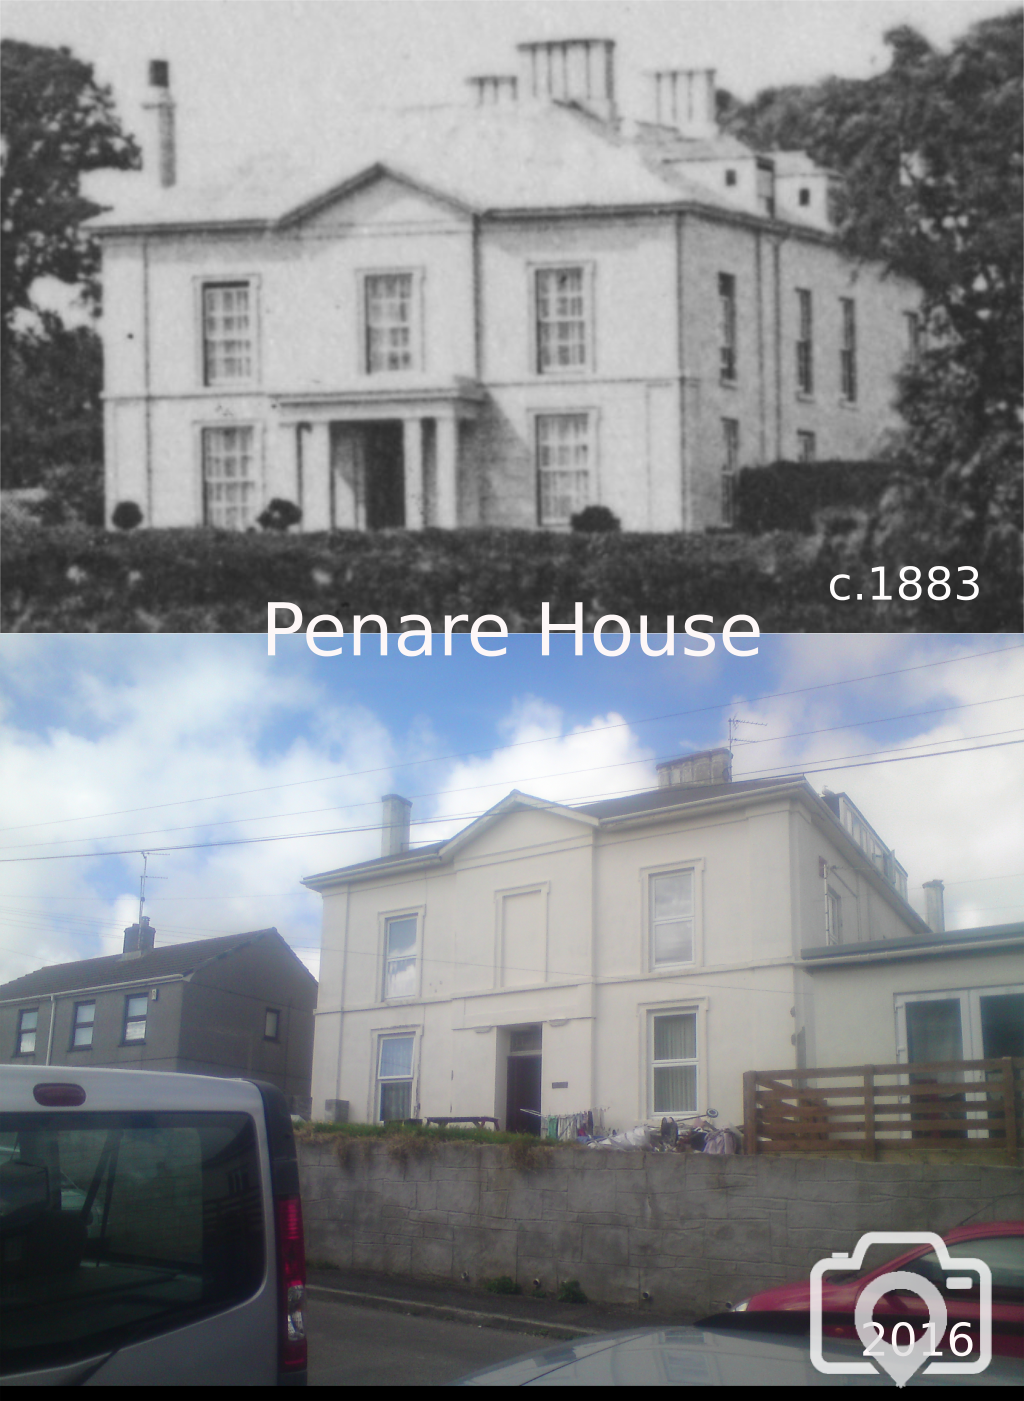 Penare House - Then And Now